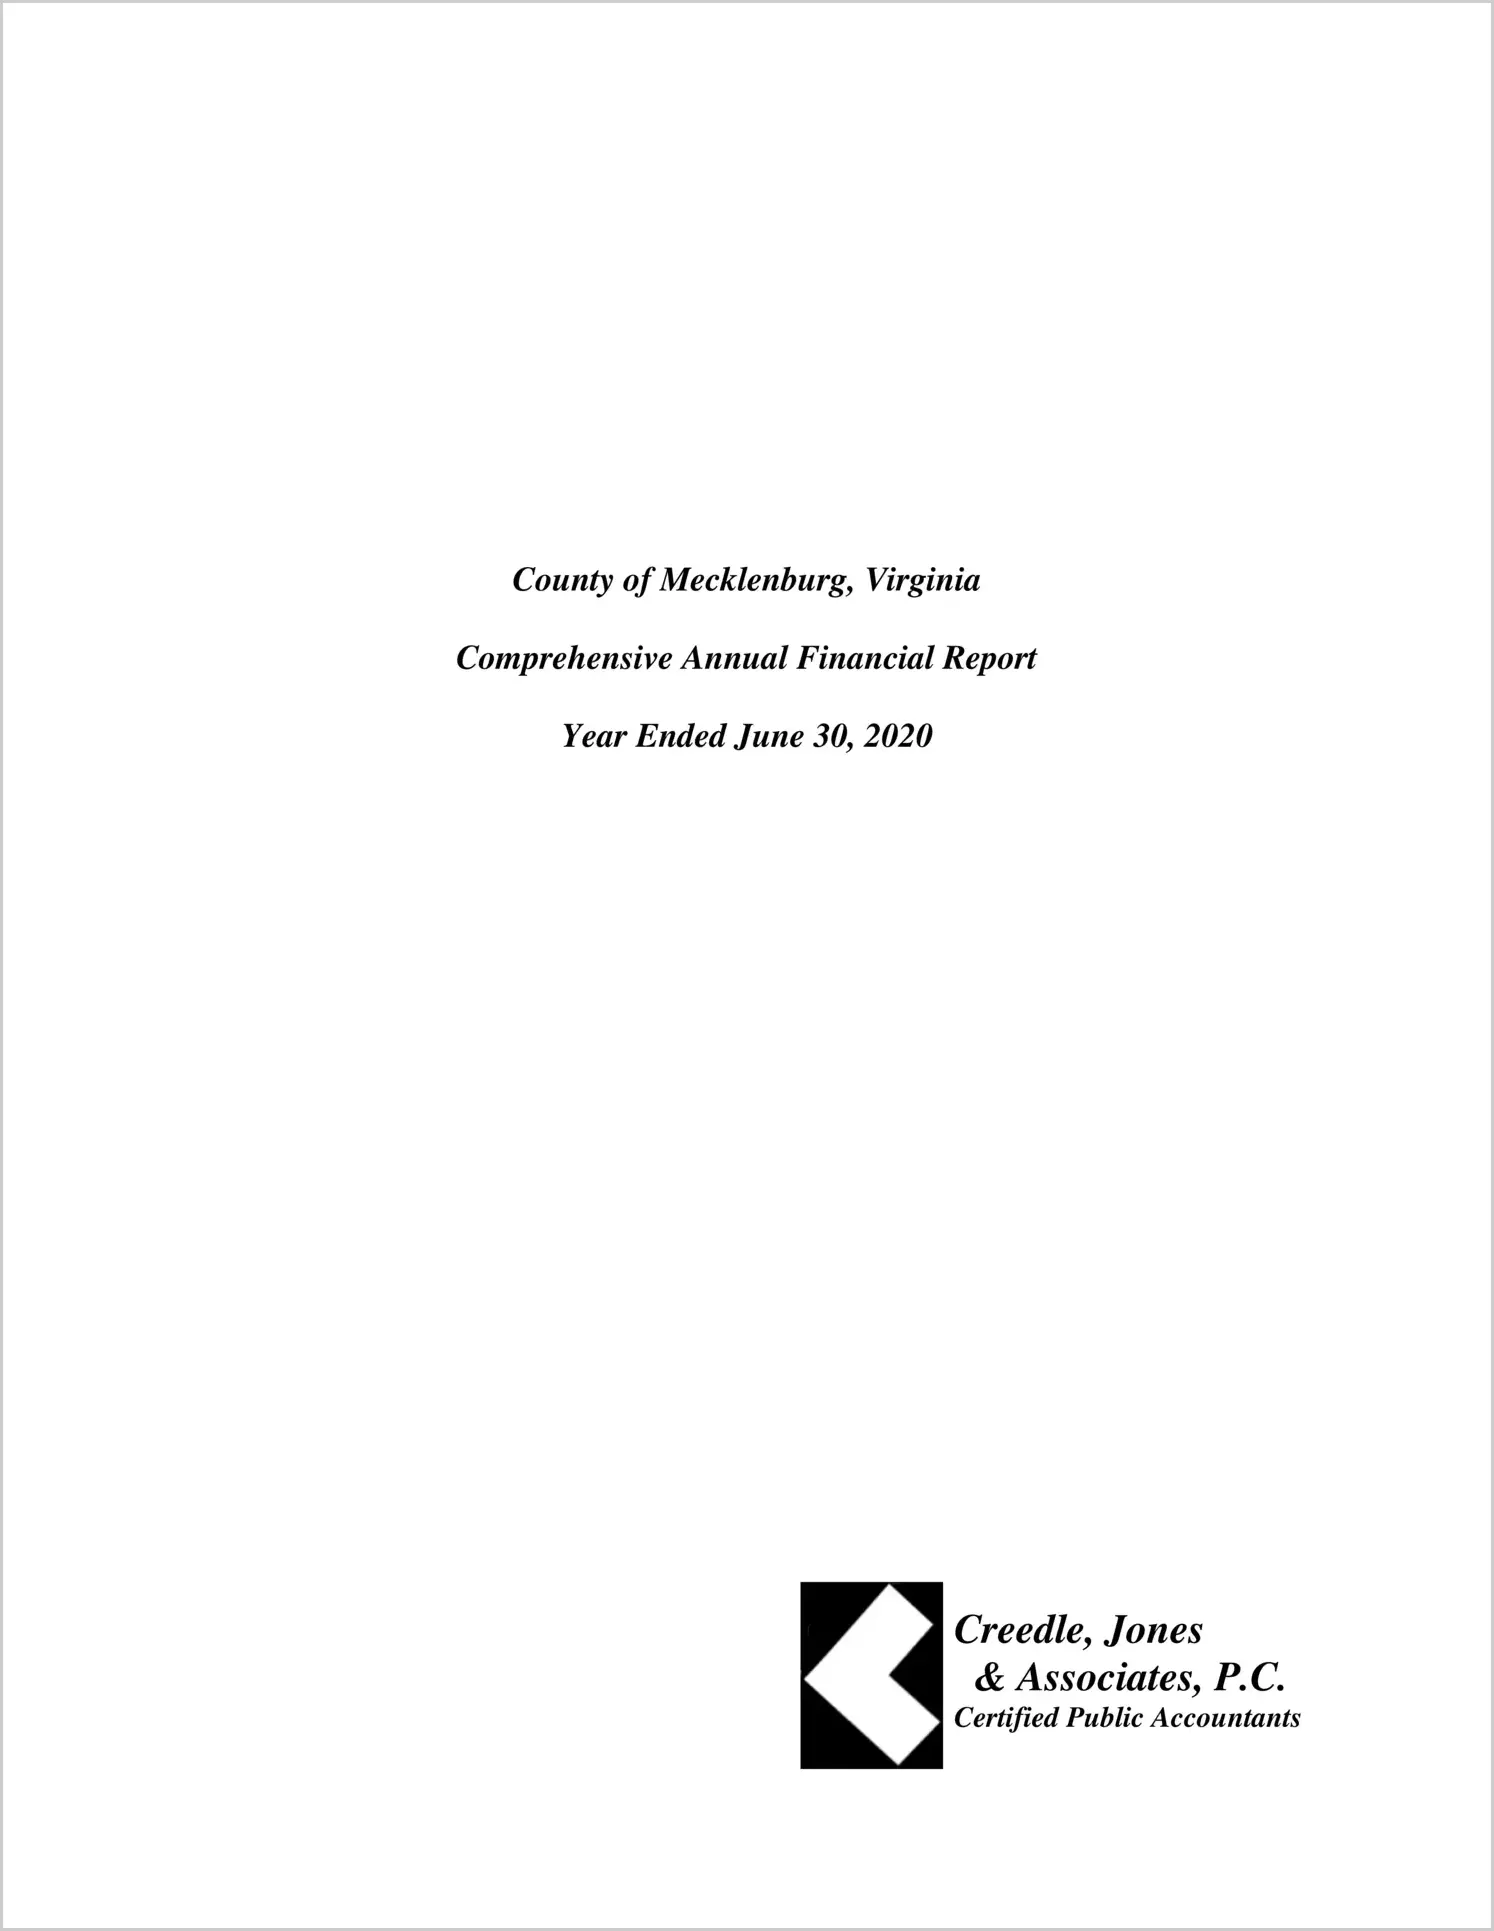 2020 Annual Financial Report for County of Mecklenburg